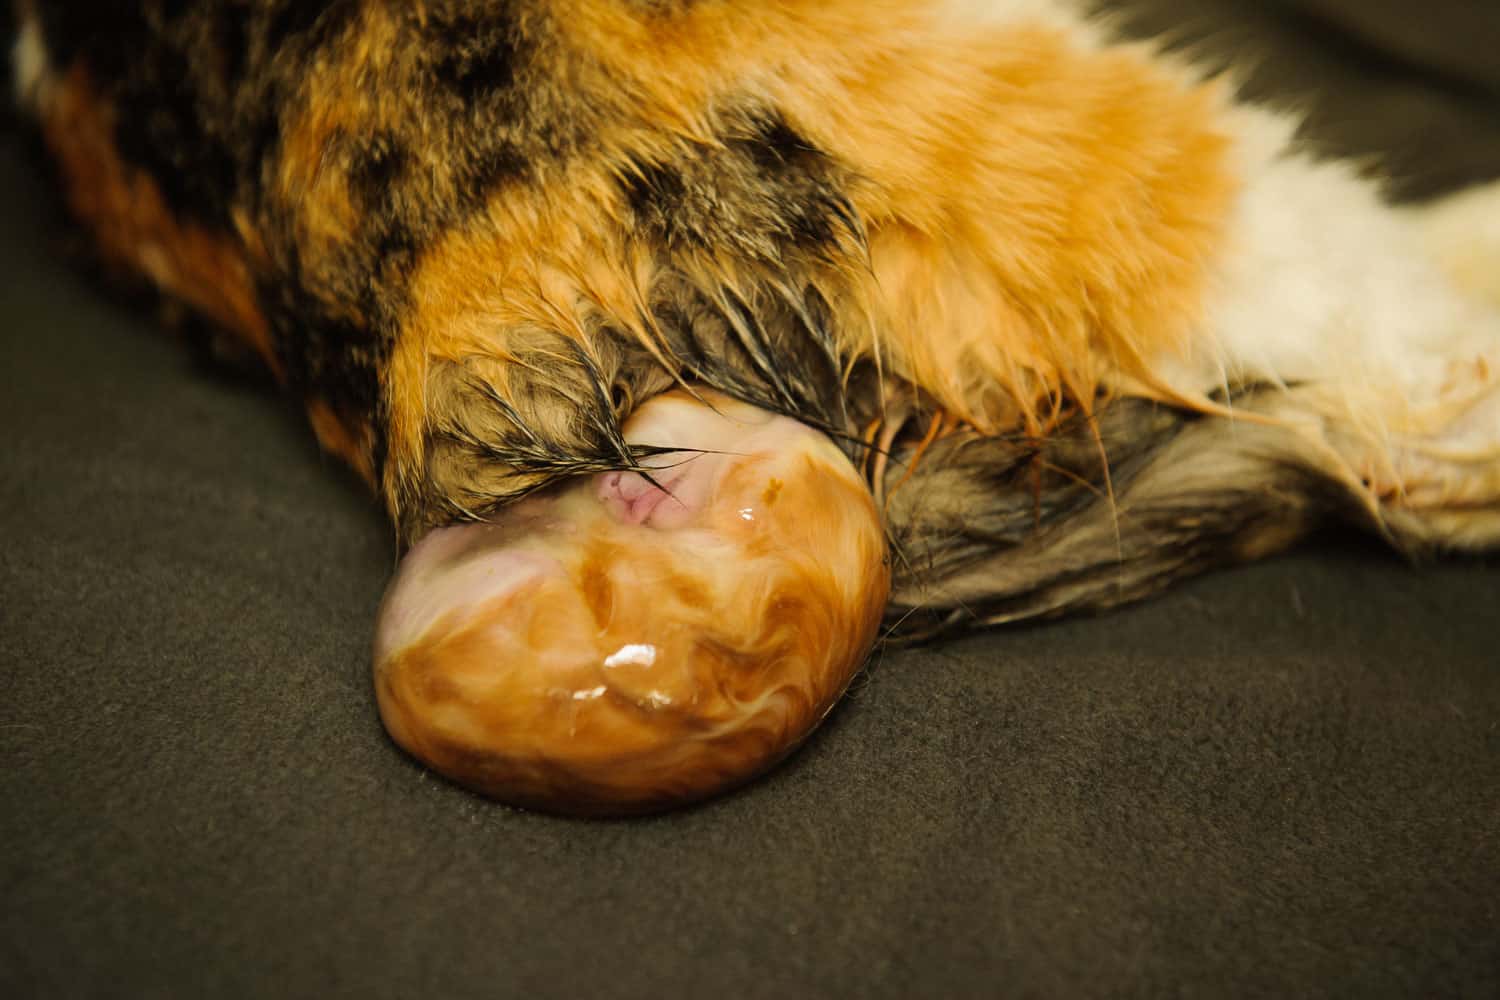 Calico Scottish Fold cat giving birth showing the kitten in the amniotic sac
